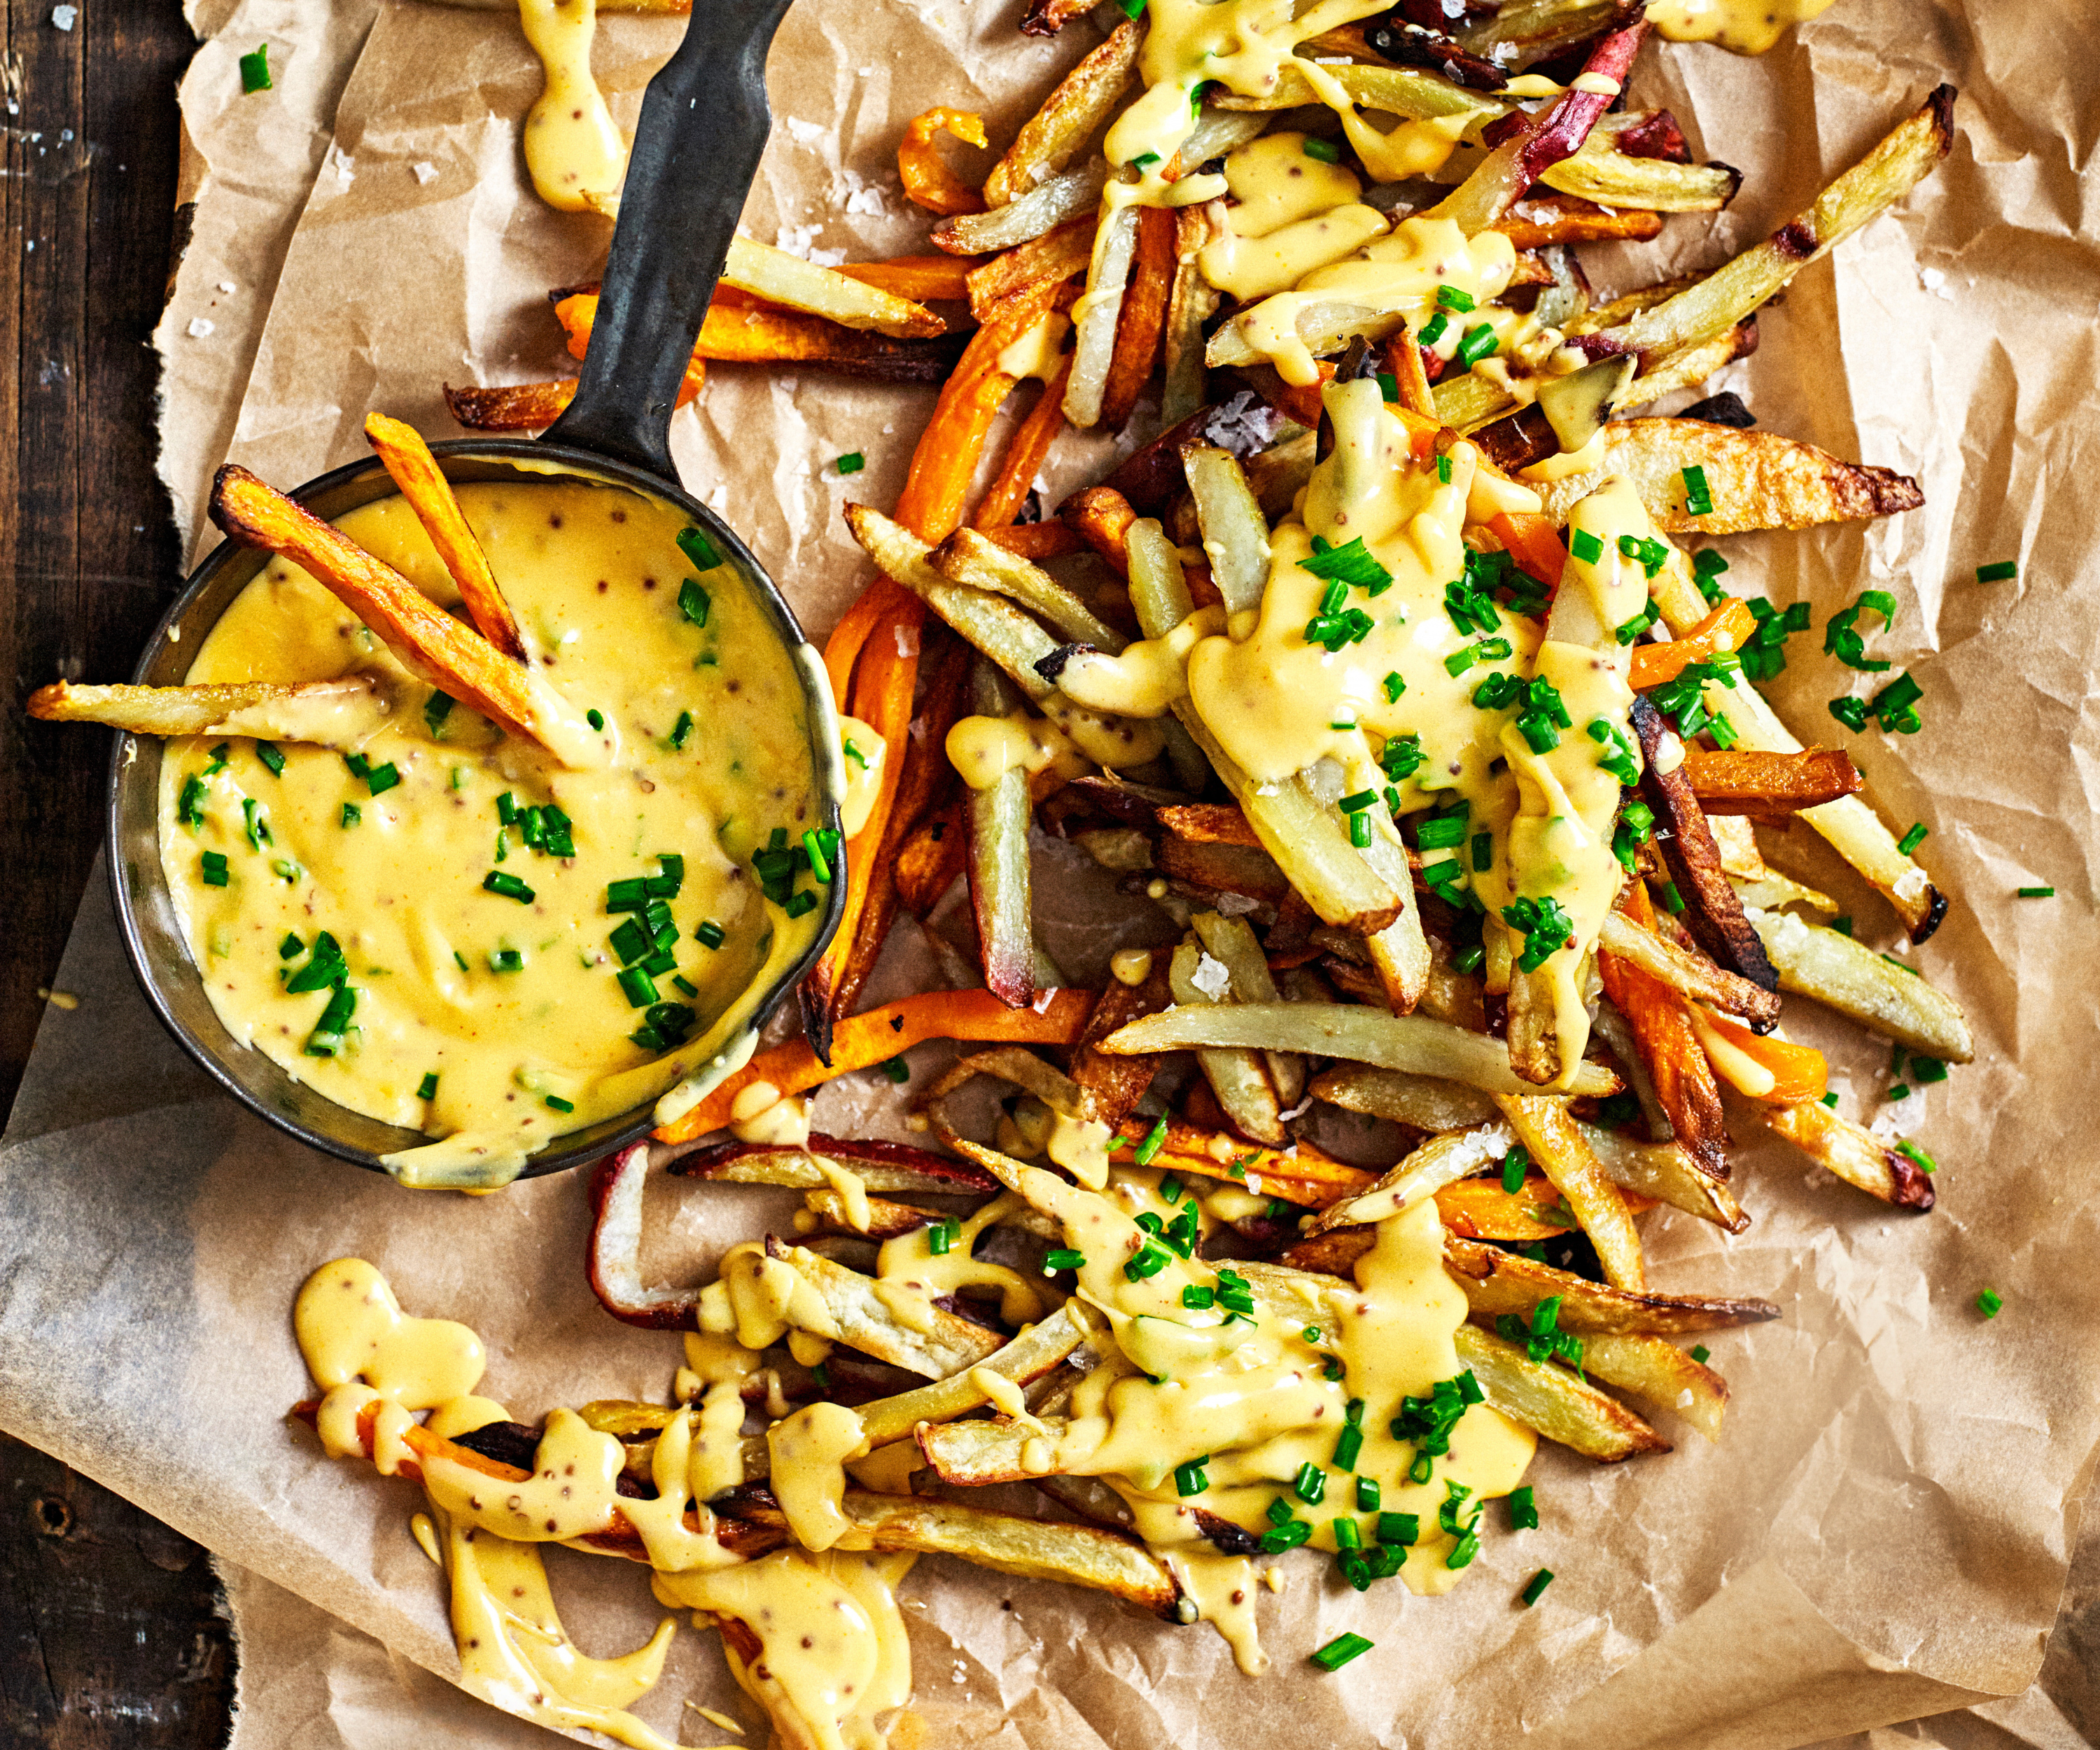 Loaded root fries with beer & mustard sauce on top.